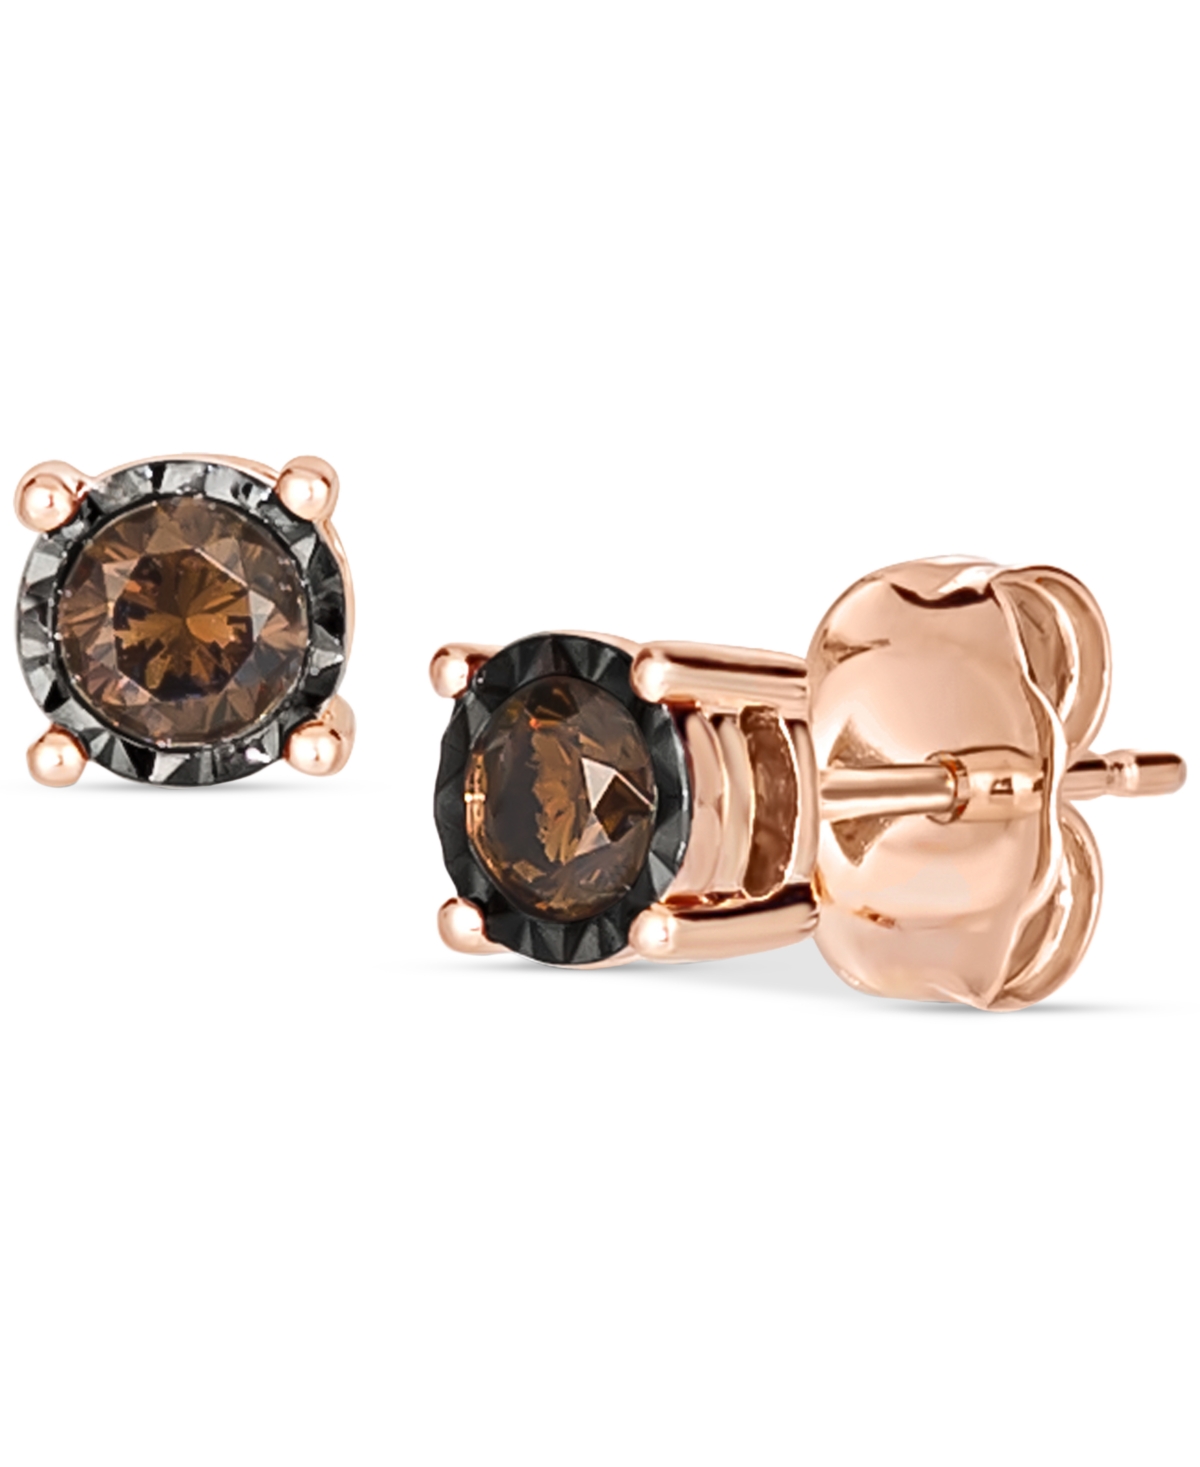 Chocolatier Chocolate Diamond Stud Earrings (1/4 ct. t.w.) in 14k Rose Gold (Also Available in White Gold or Yellow Gold) - K Strawberry Gold